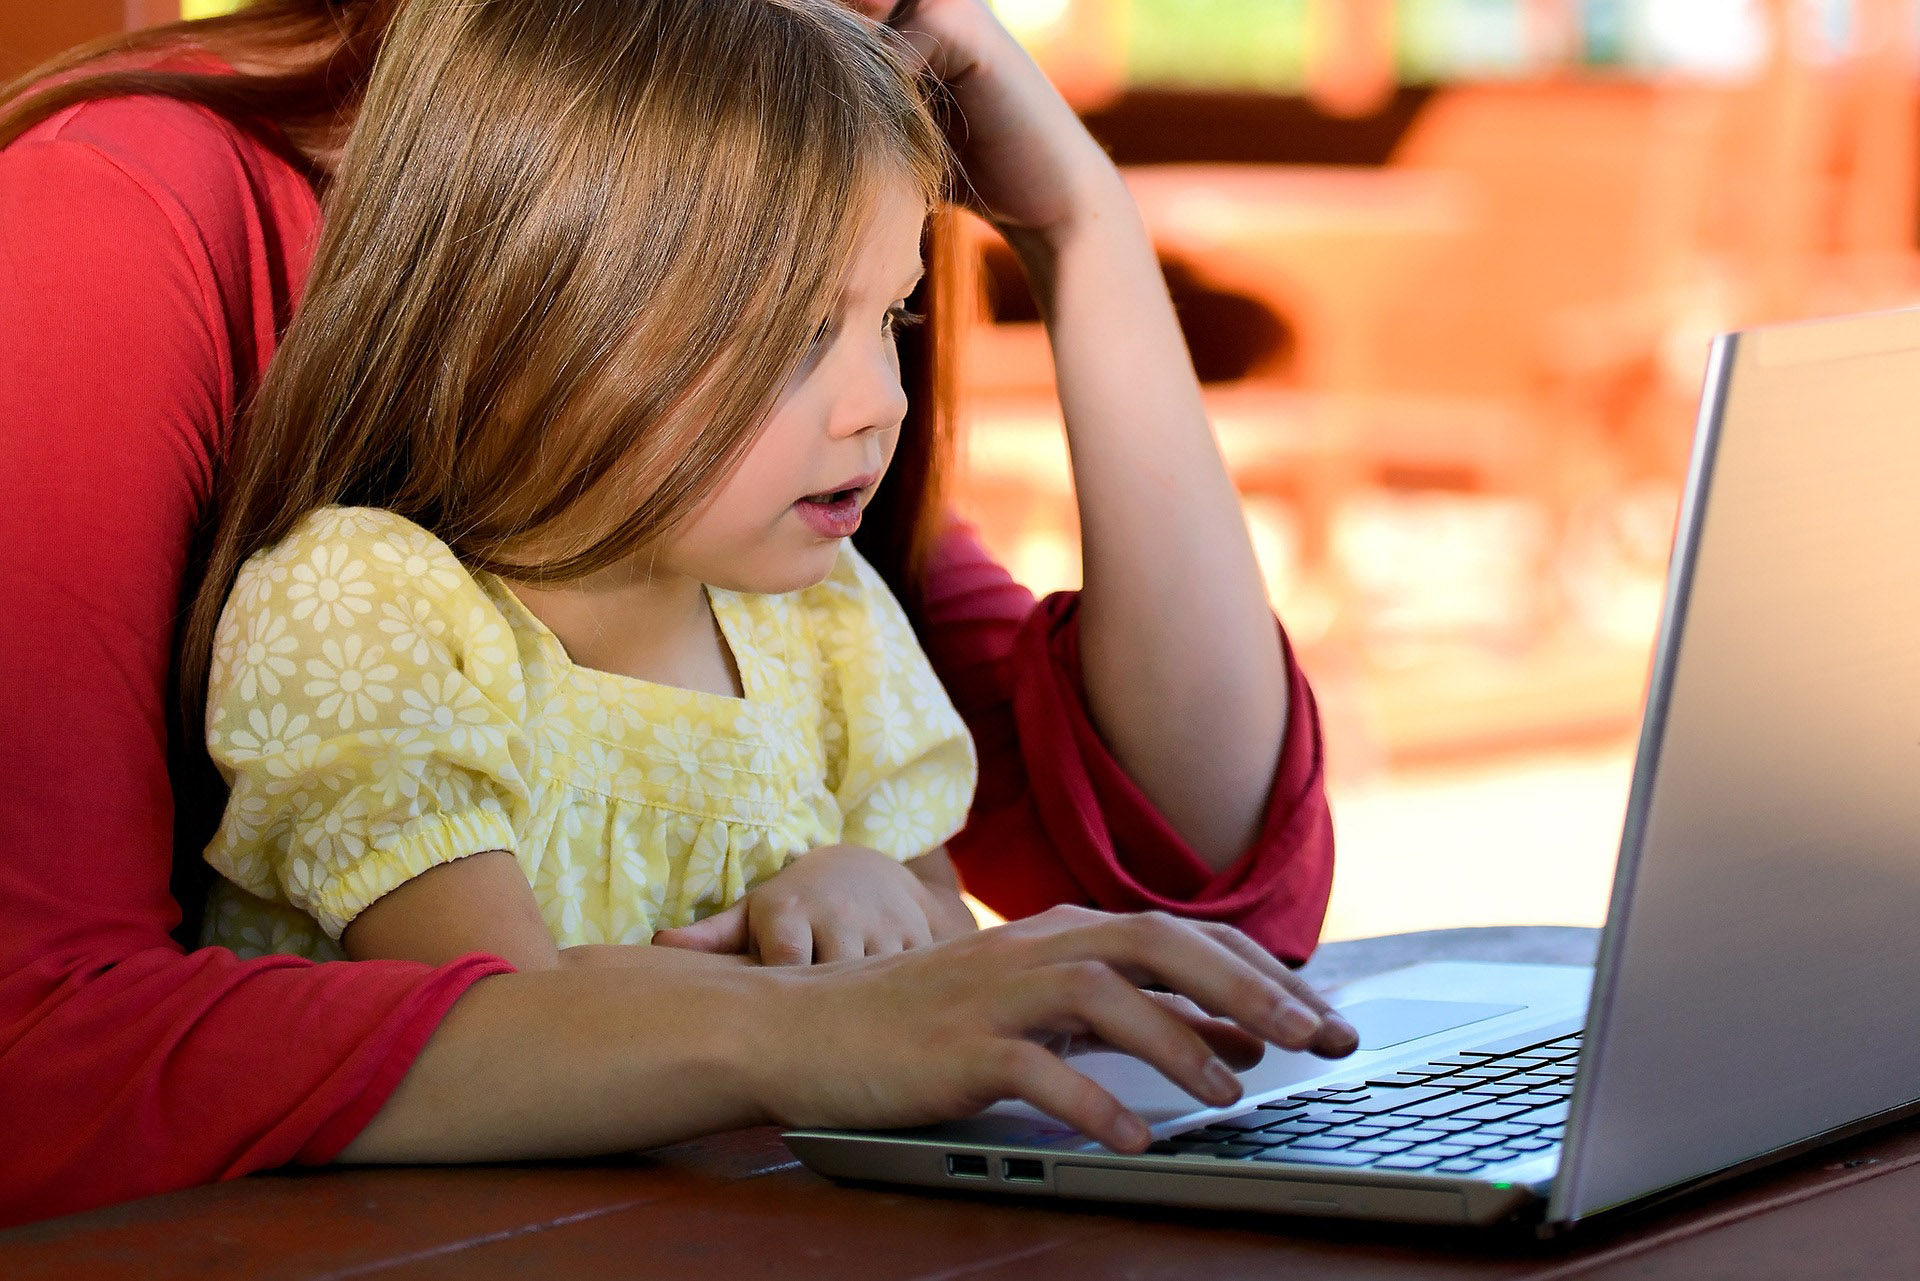 Three things you can do to ensure your child doesn’t accidentally discover inappropriate material online